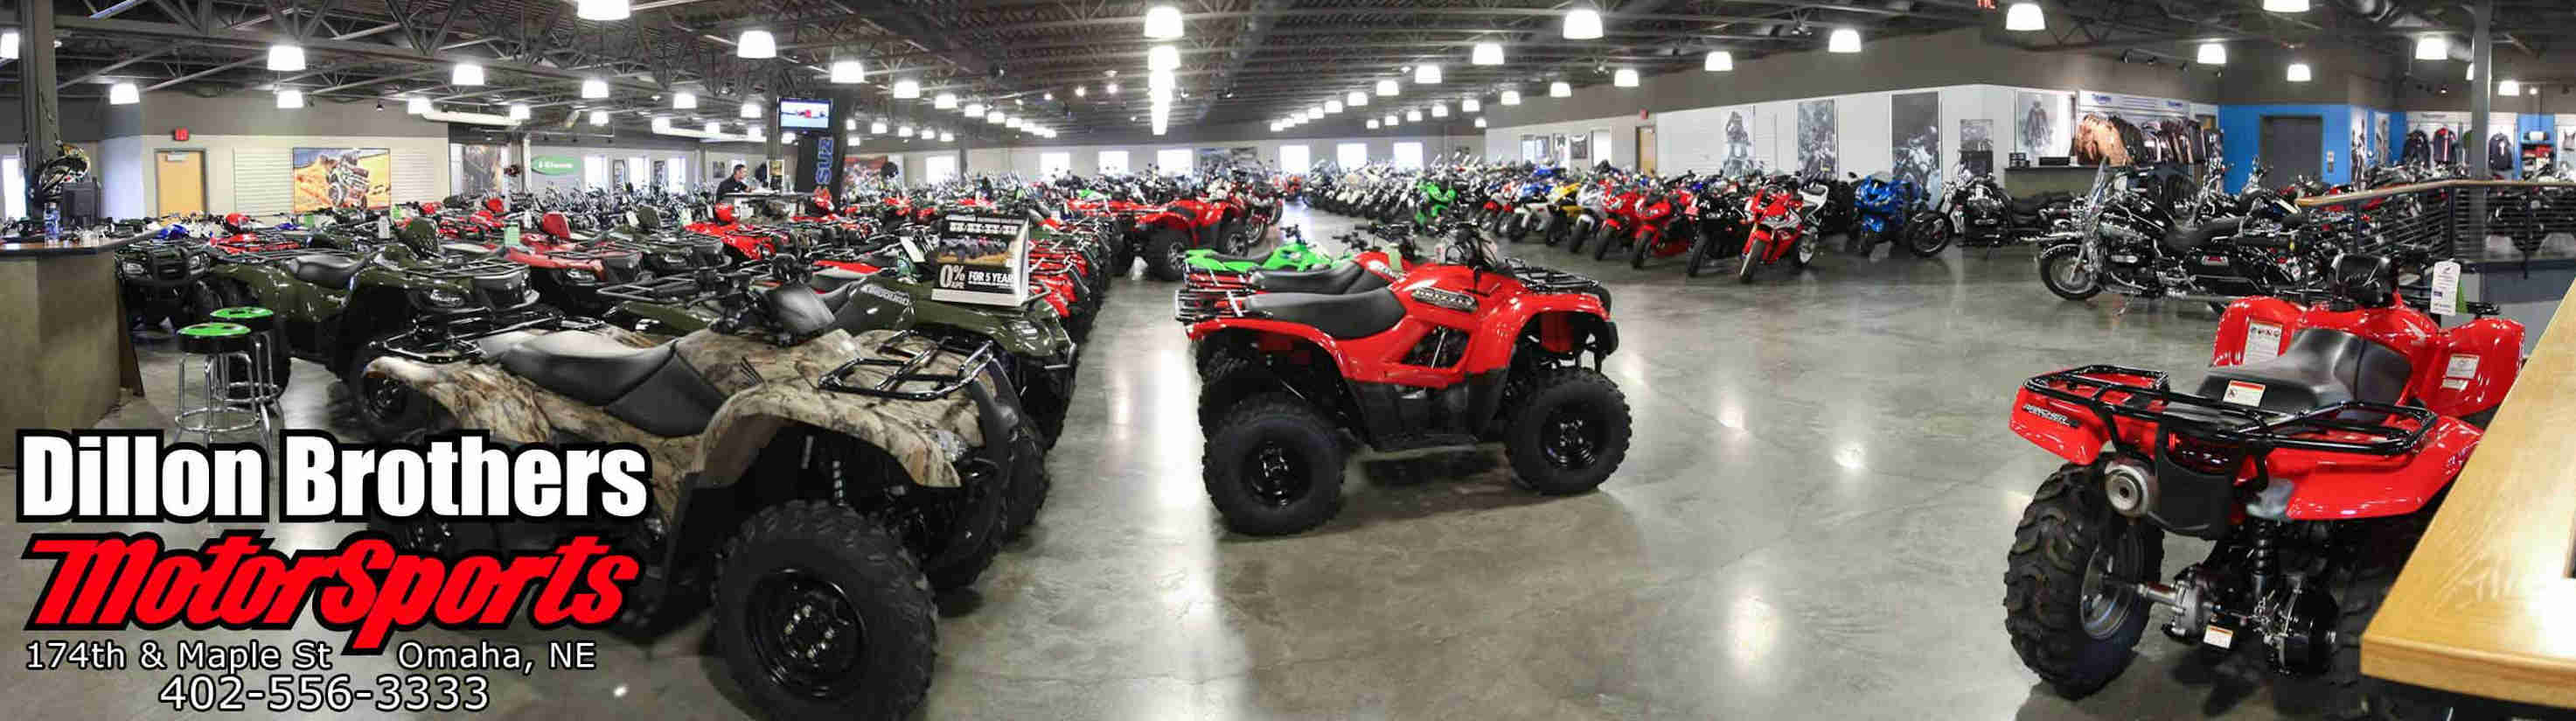 Atvs, motocycles and more in Dillon Brothers MotorSports